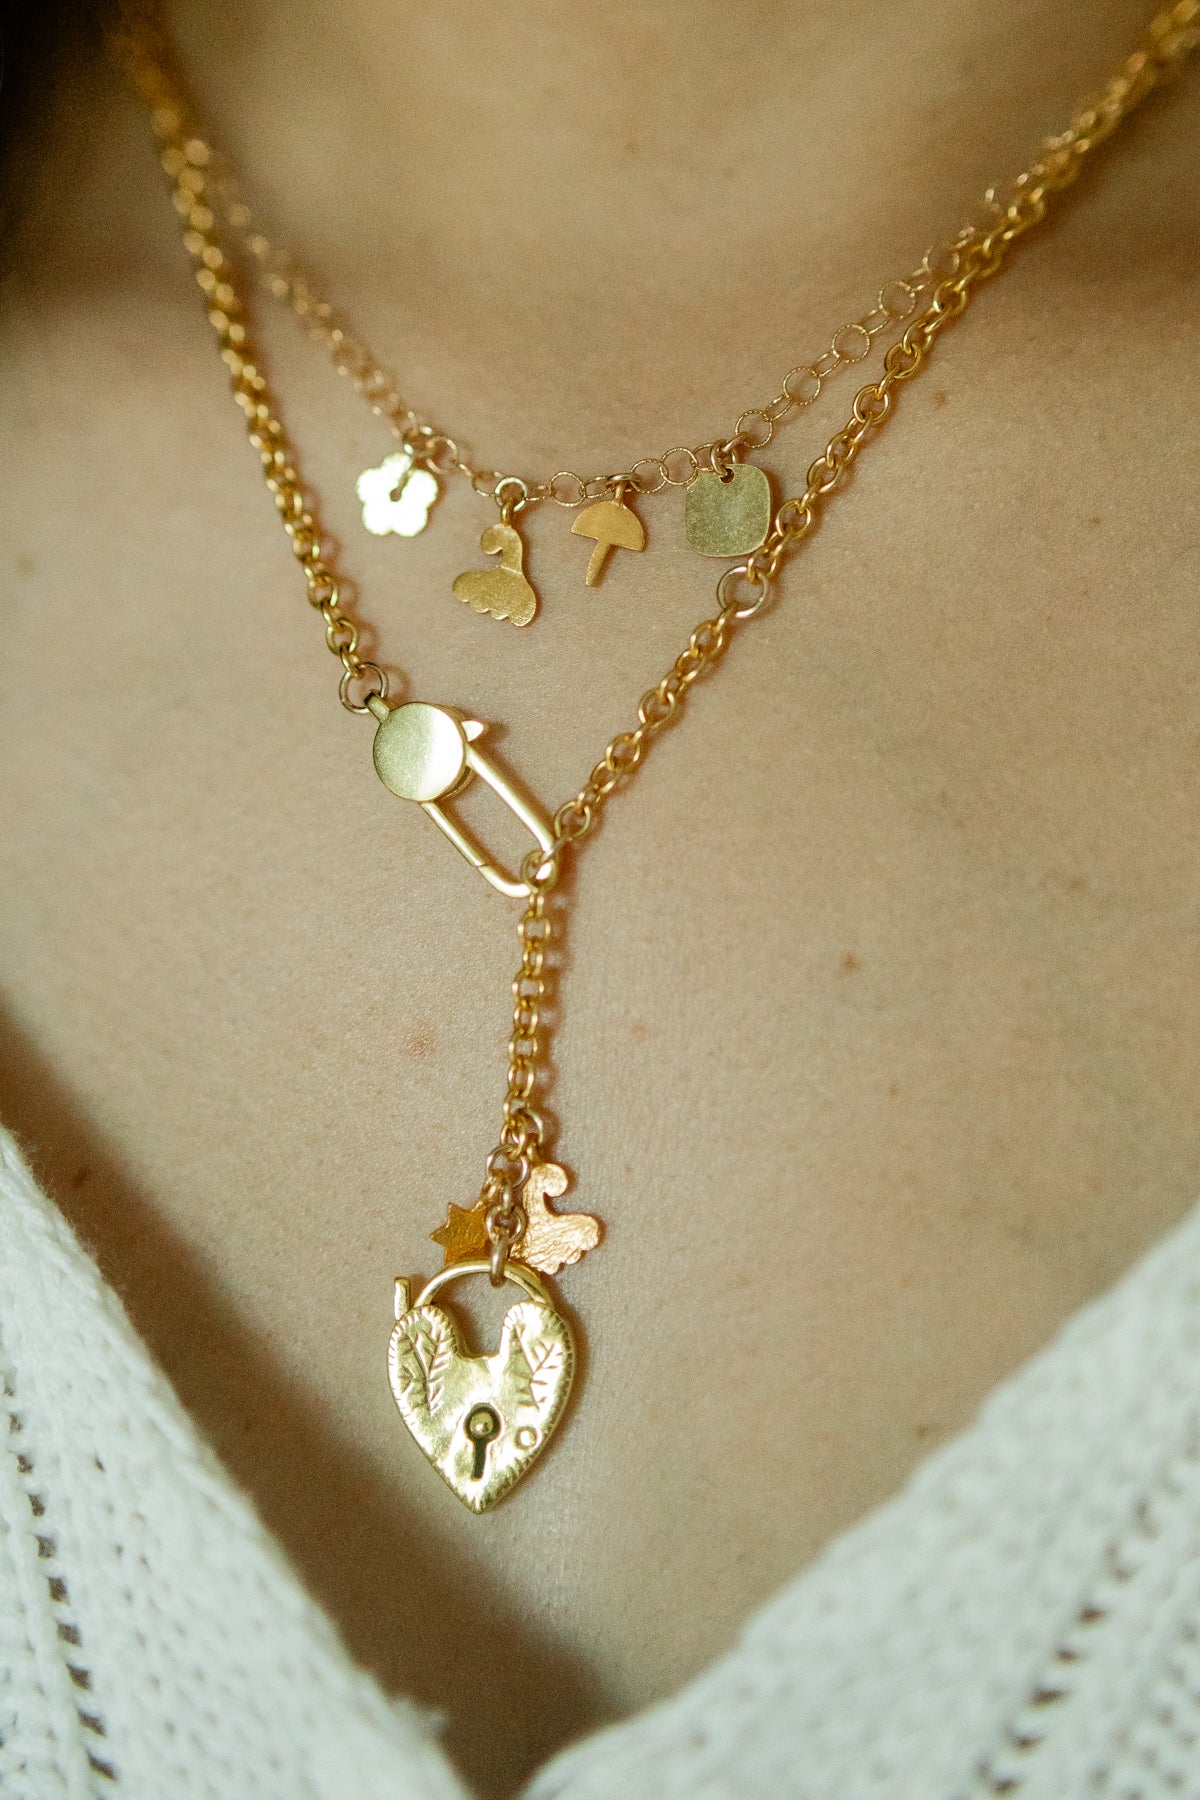 Mended heart and industrial clasp necklace